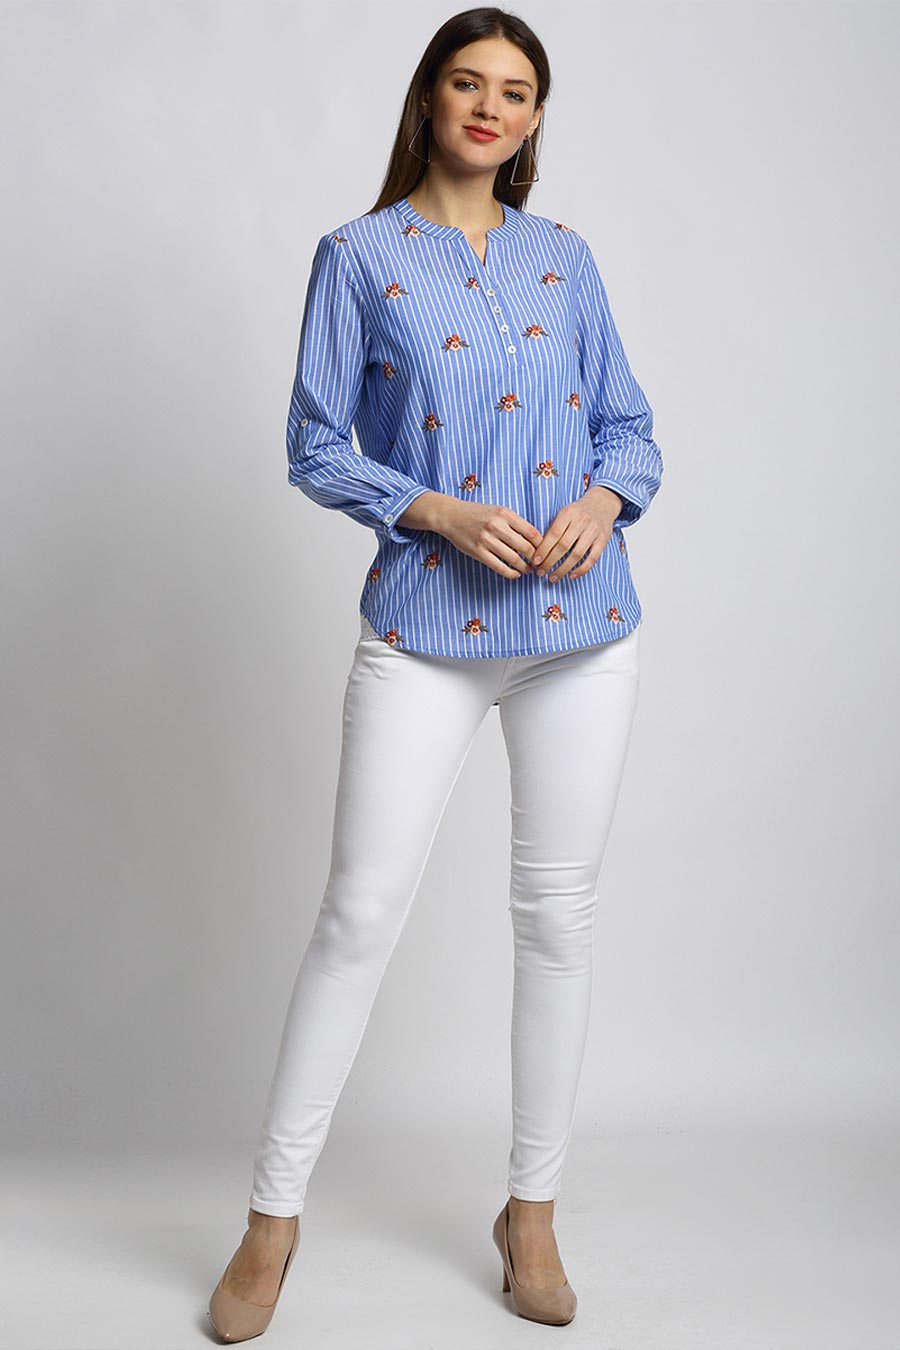 Floral Embroidered Blue Stripes Top